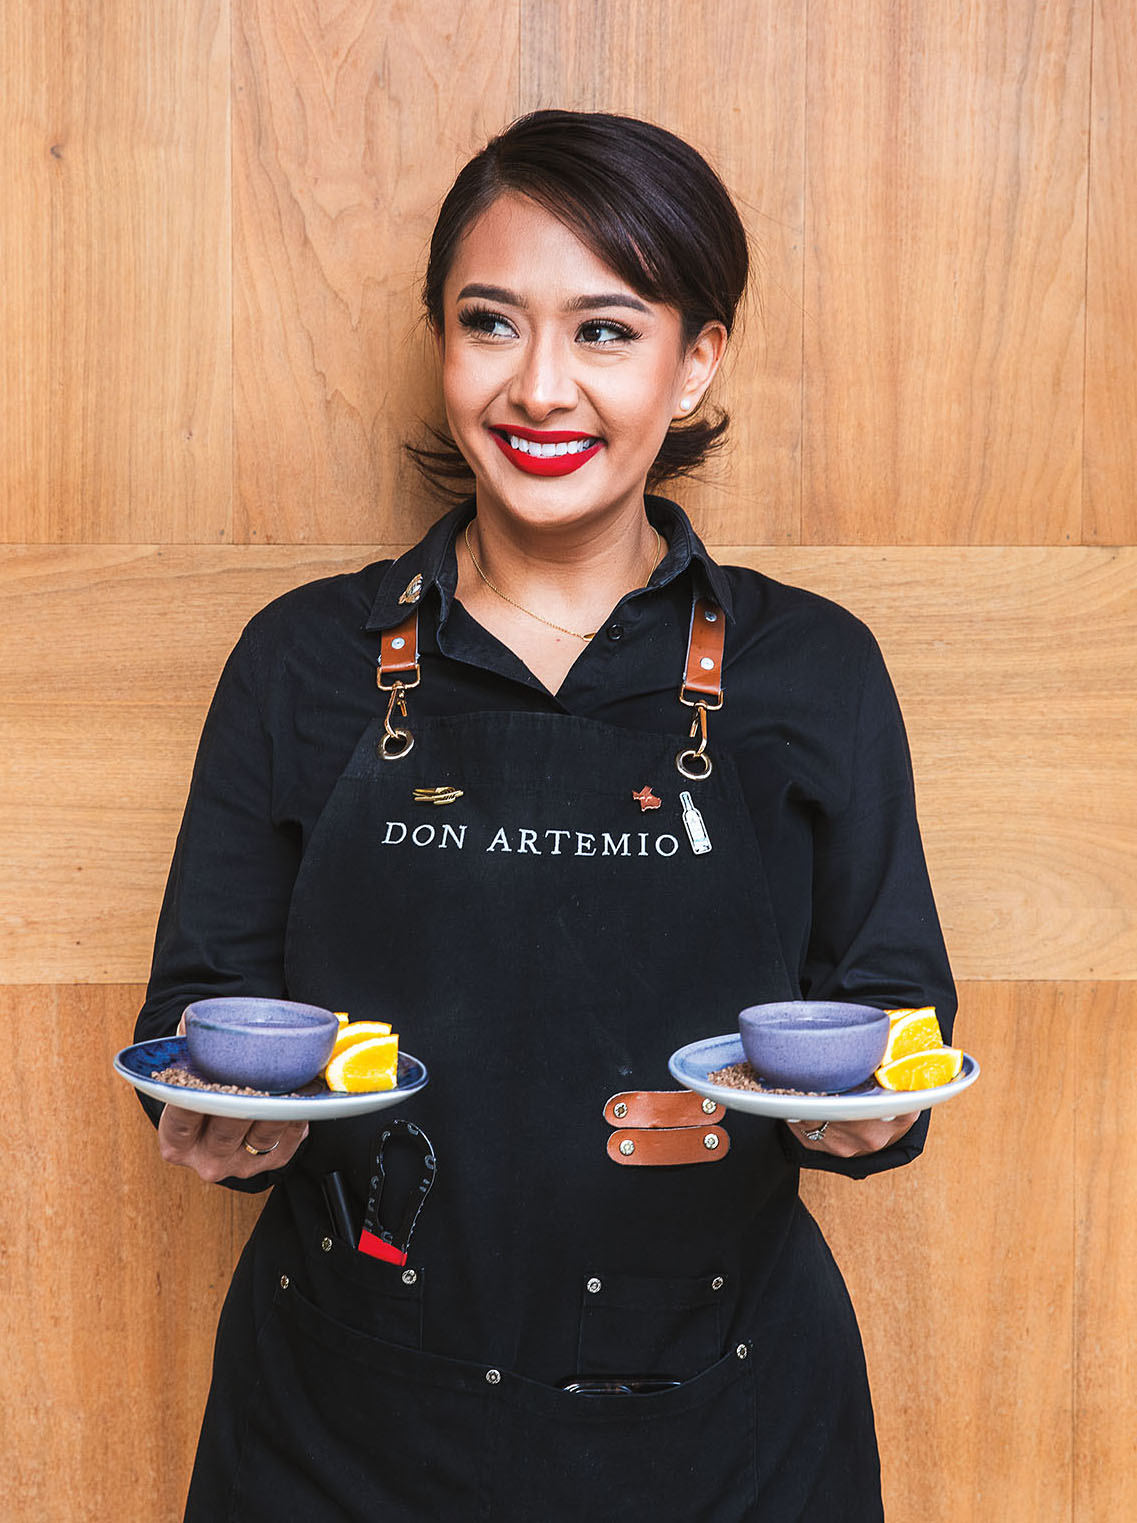 A person wearing a dark apron holds two plates with colorful bowls atop